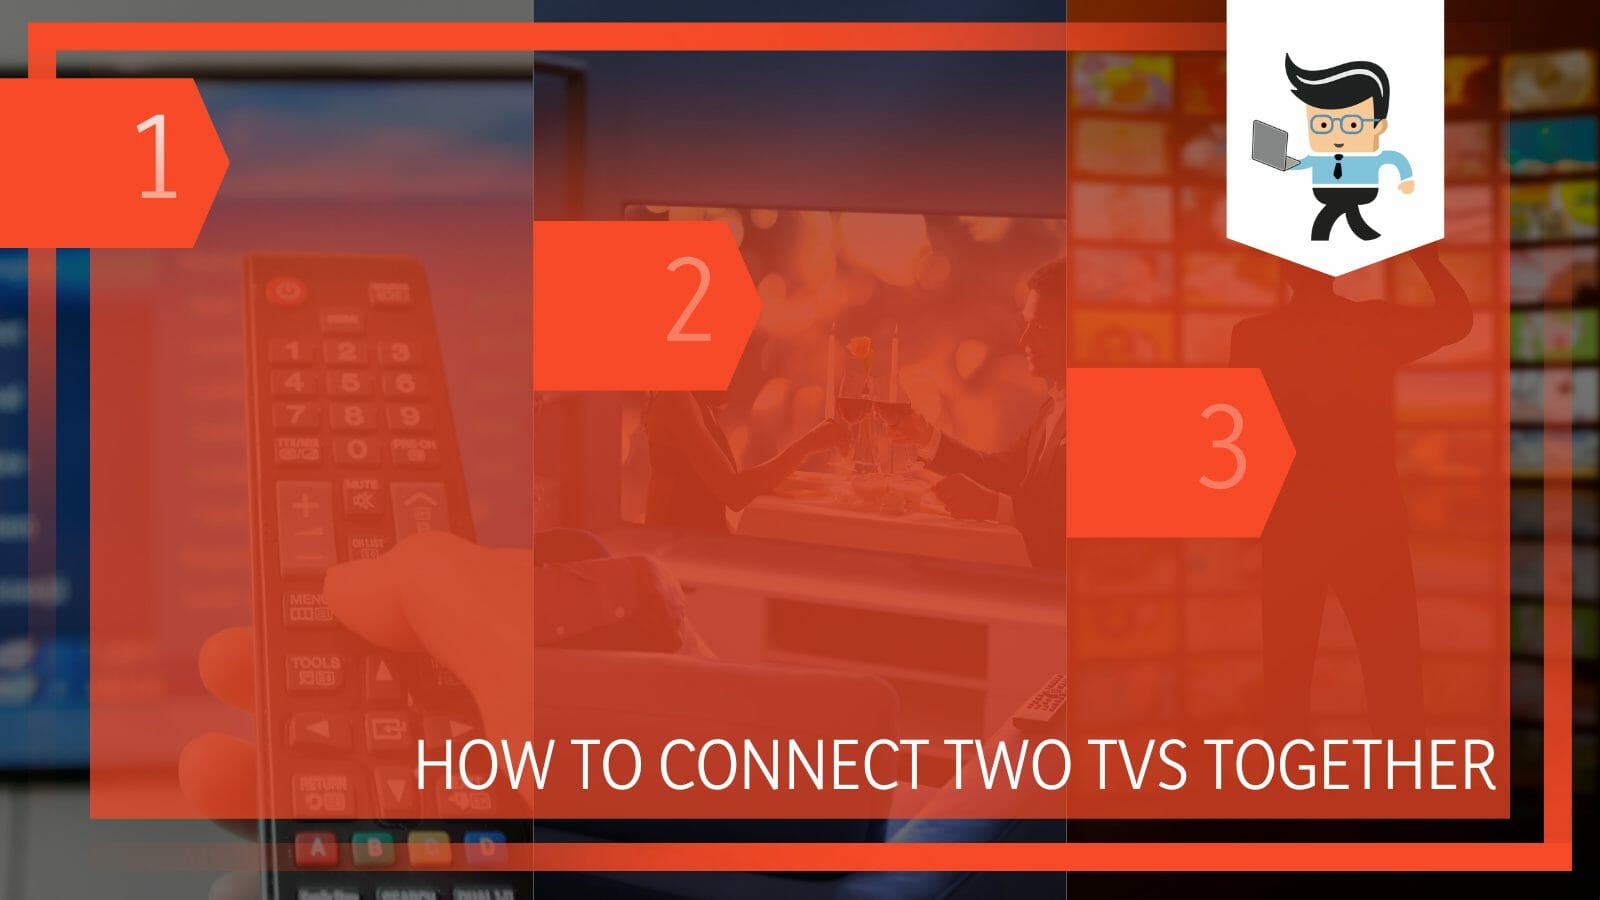 How To Connect Two TVs Together